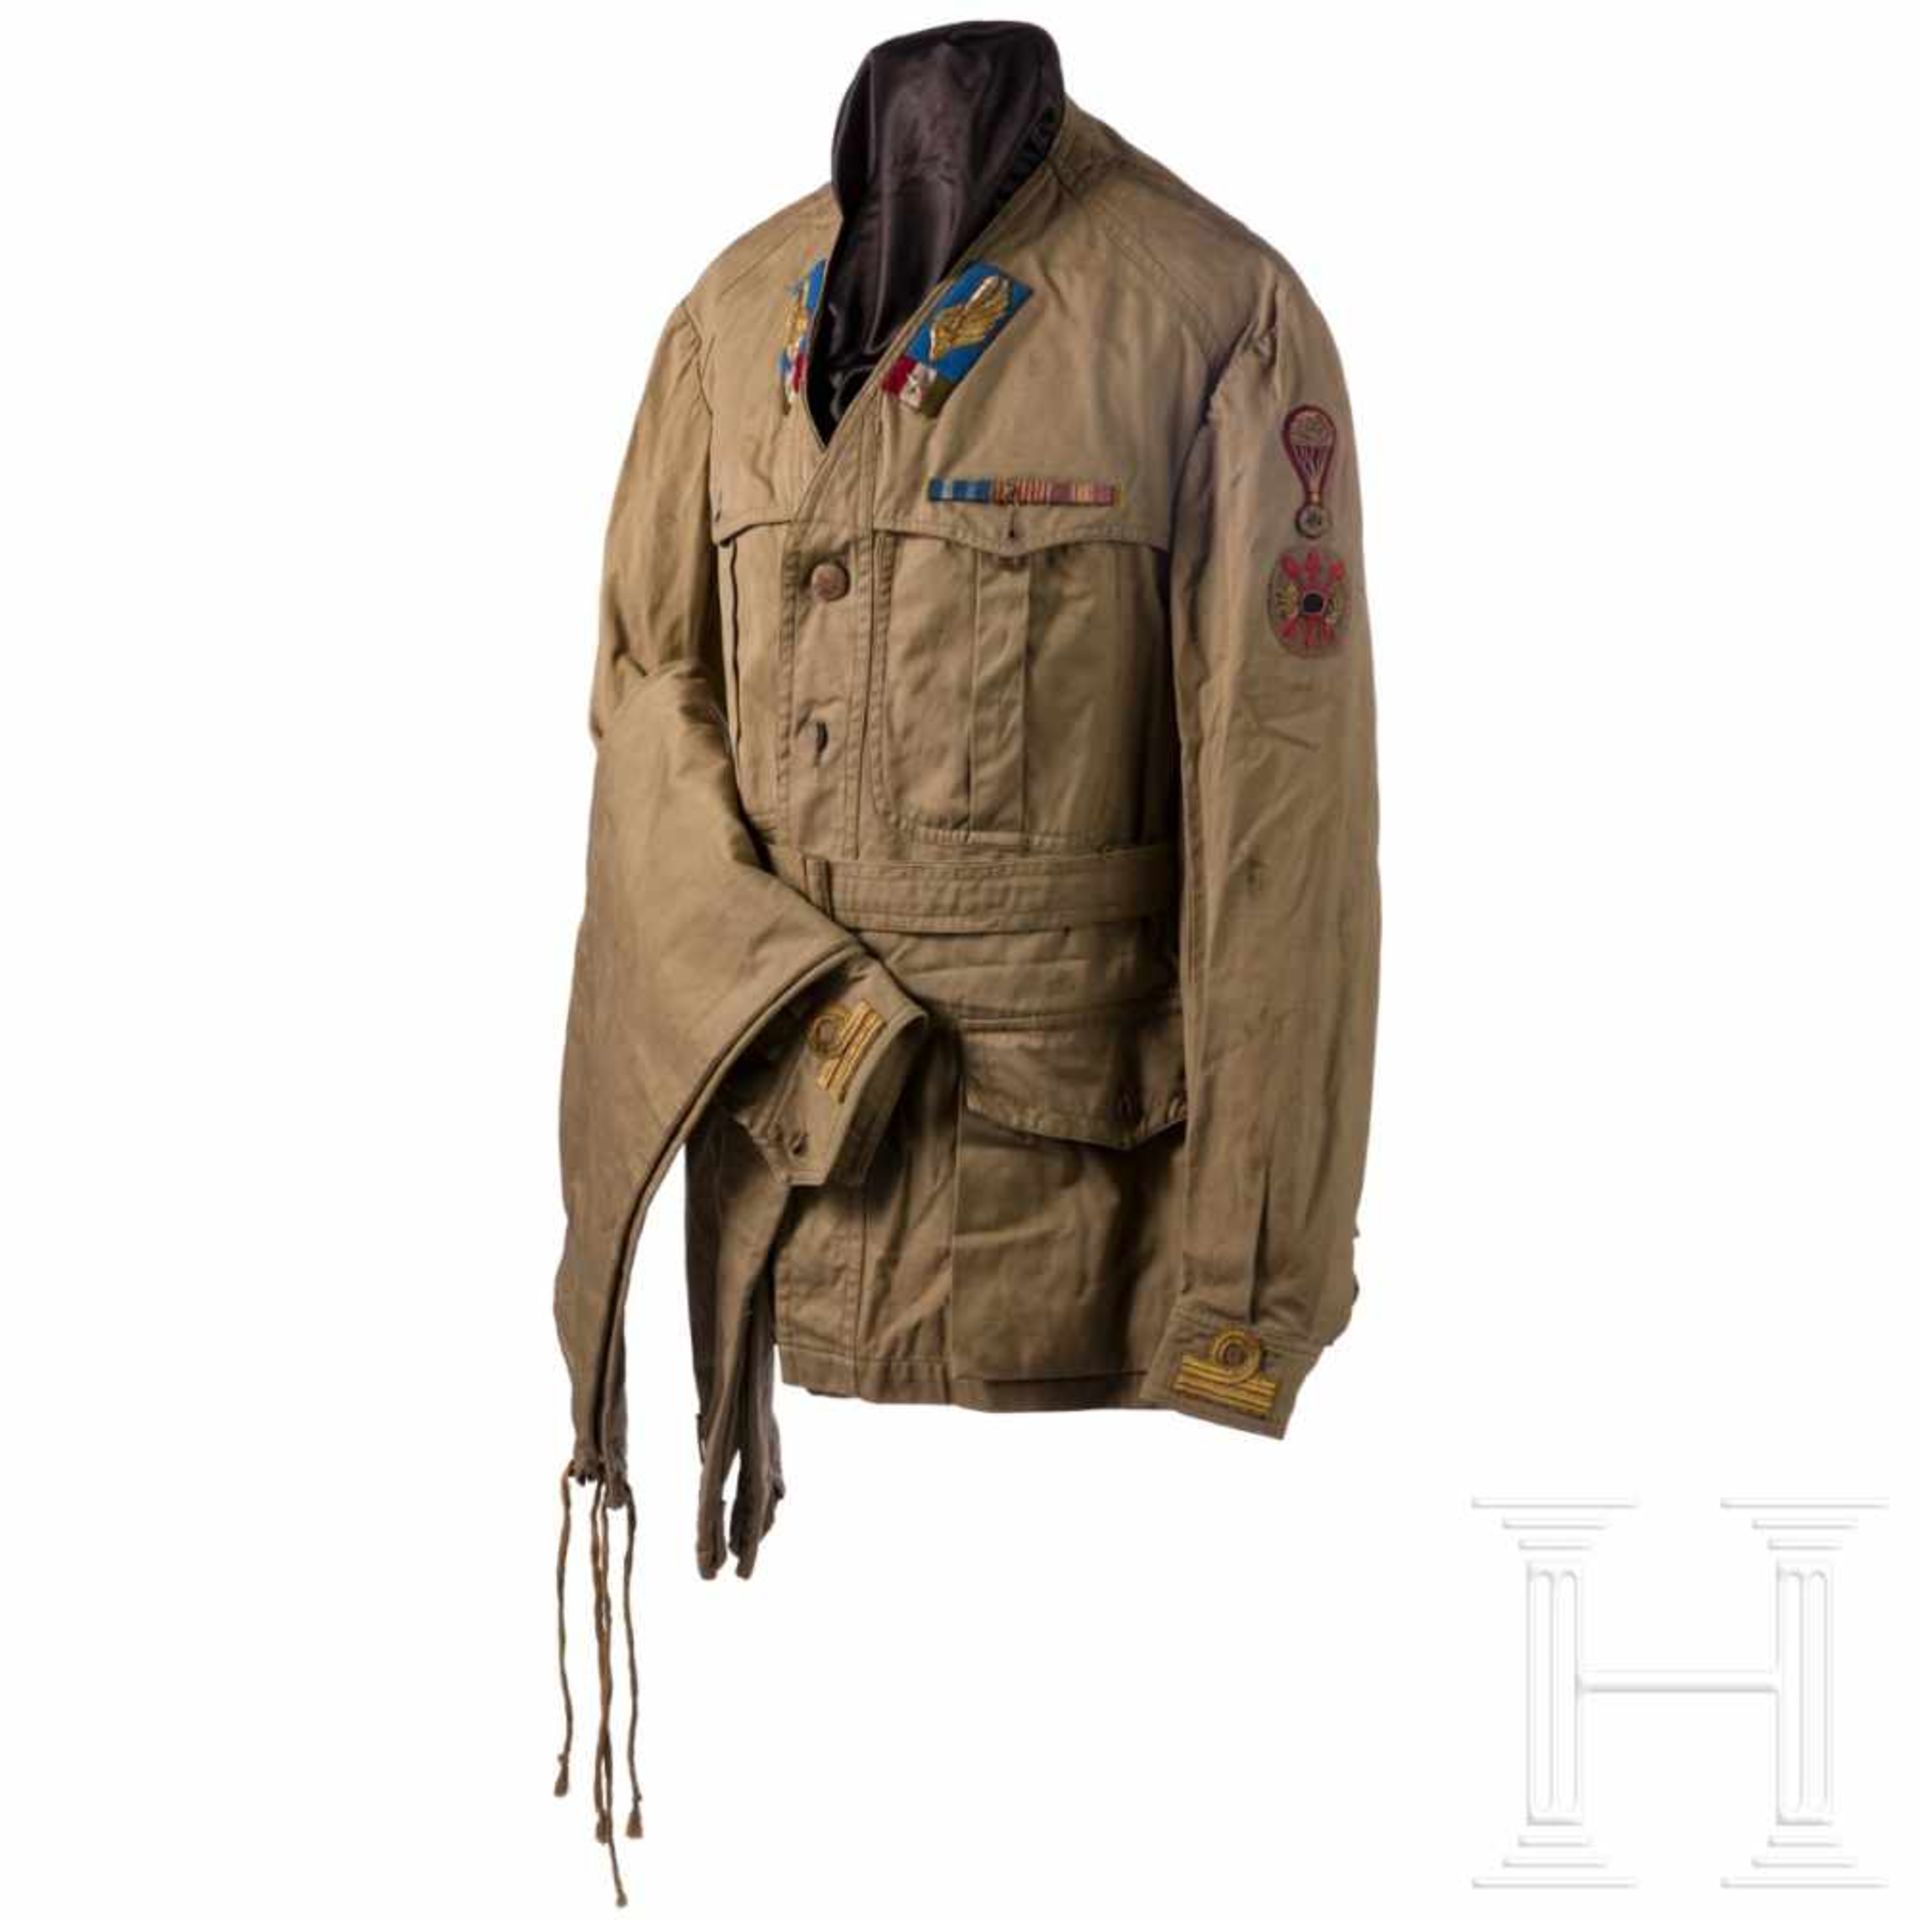 A summer uniform for a training officer of the paratroopers in World War IIUniform tunic made of